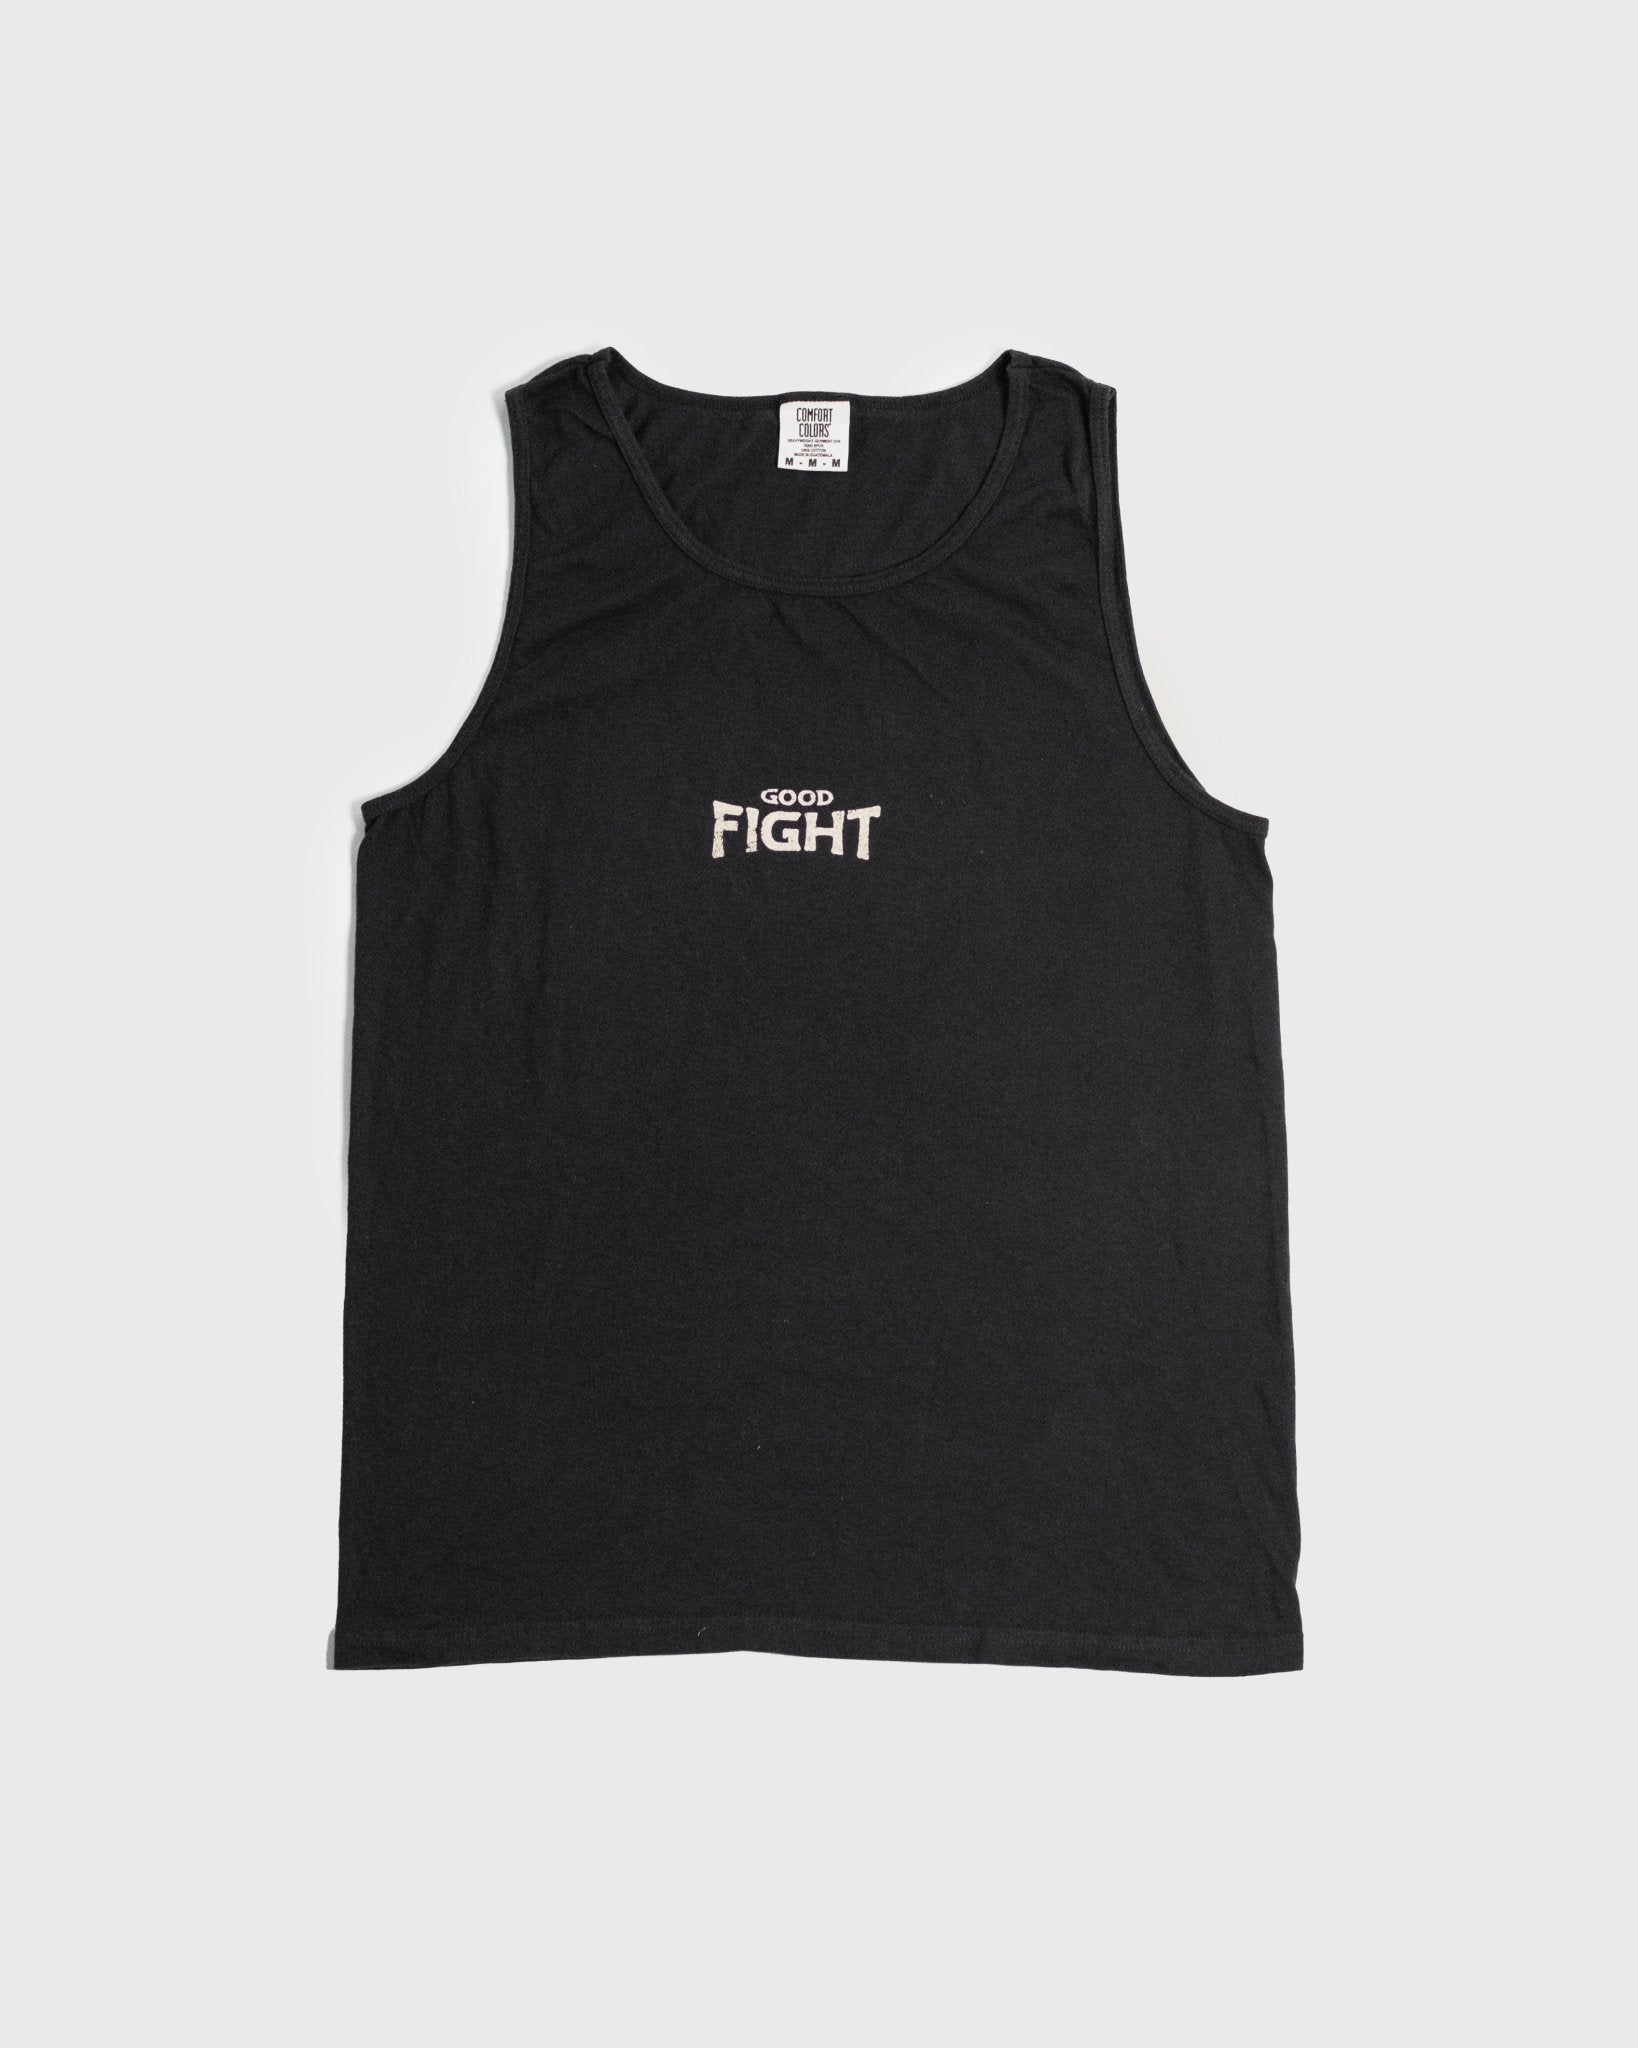 "Good Fight" Black Comfort Colors Tank (Limited Edition) - Proclamation Coalition